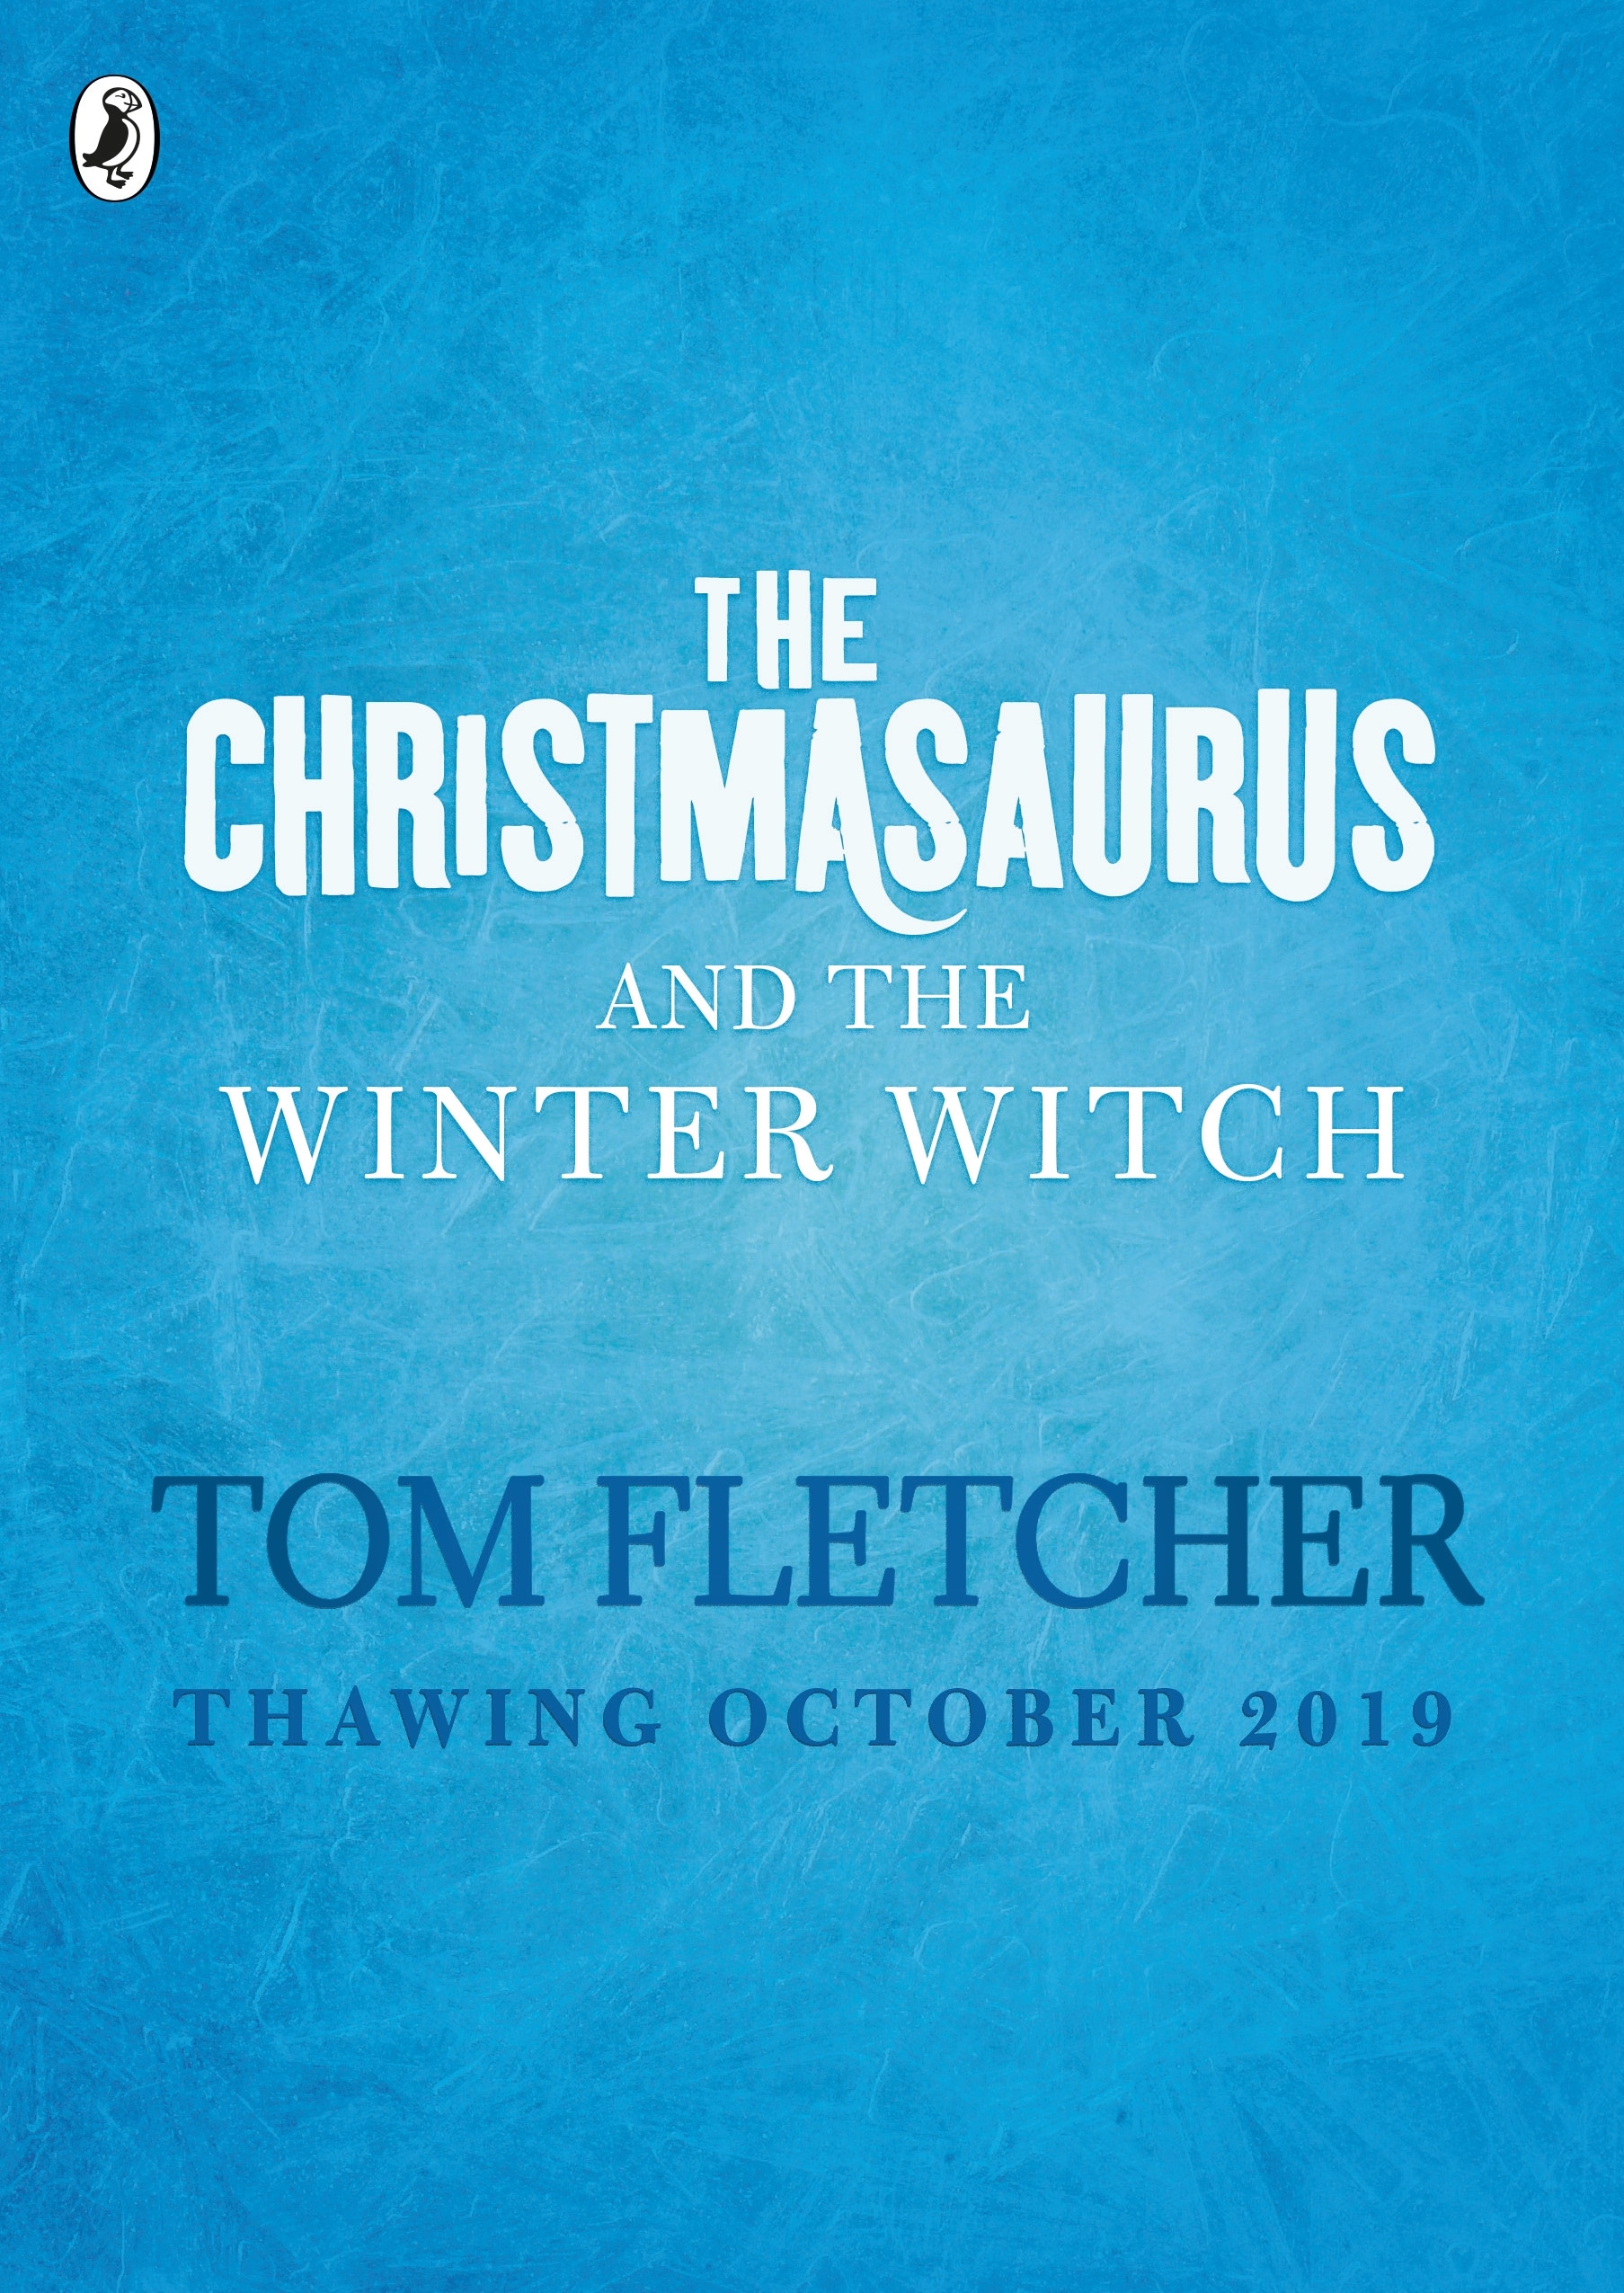 Book “The Christmasaurus and the Winter Witch” by Tom Fletcher, Shane Devries — October 3, 2019